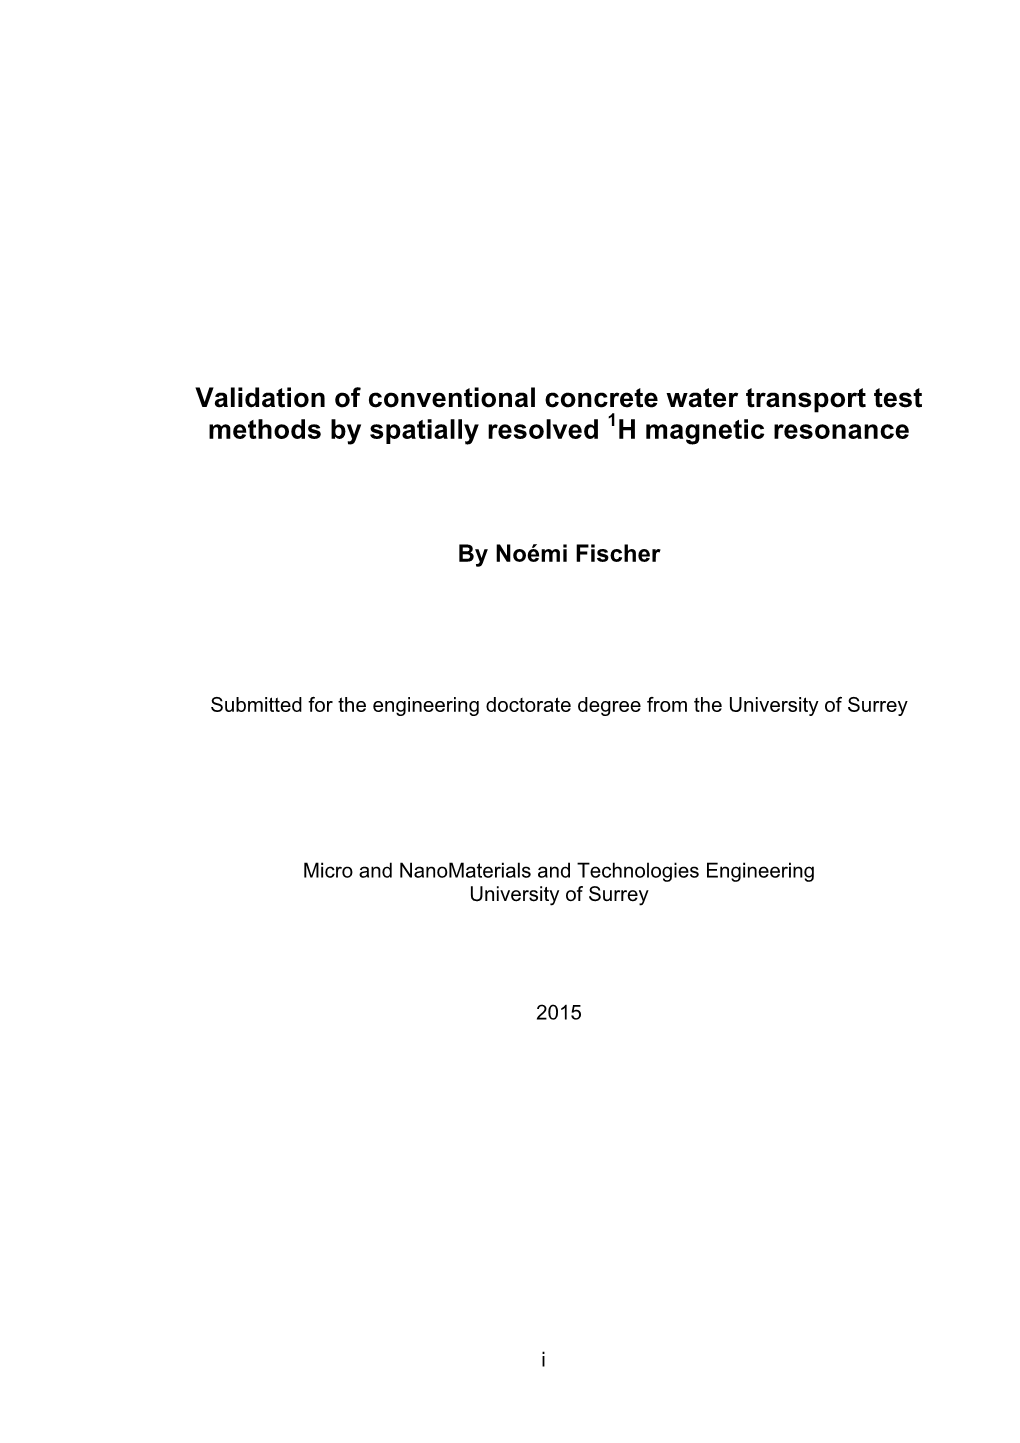 Validation of Conventional Concrete Water Transport Test Methods by Spatially Resolved 1H Magnetic Resonance